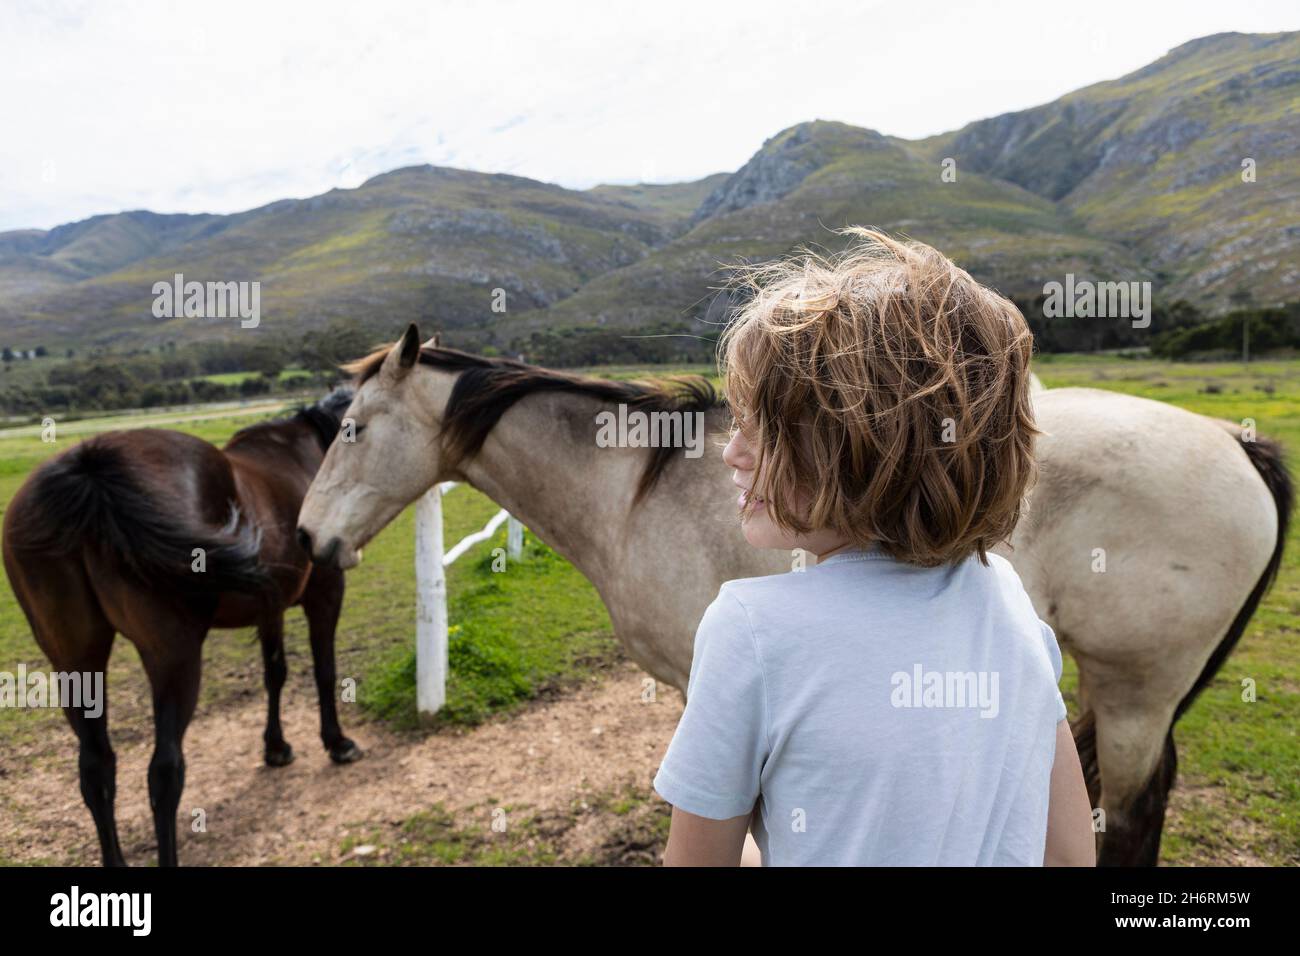 Eight year old boy leaning on a fence, looking at two horses in a field Stock Photo